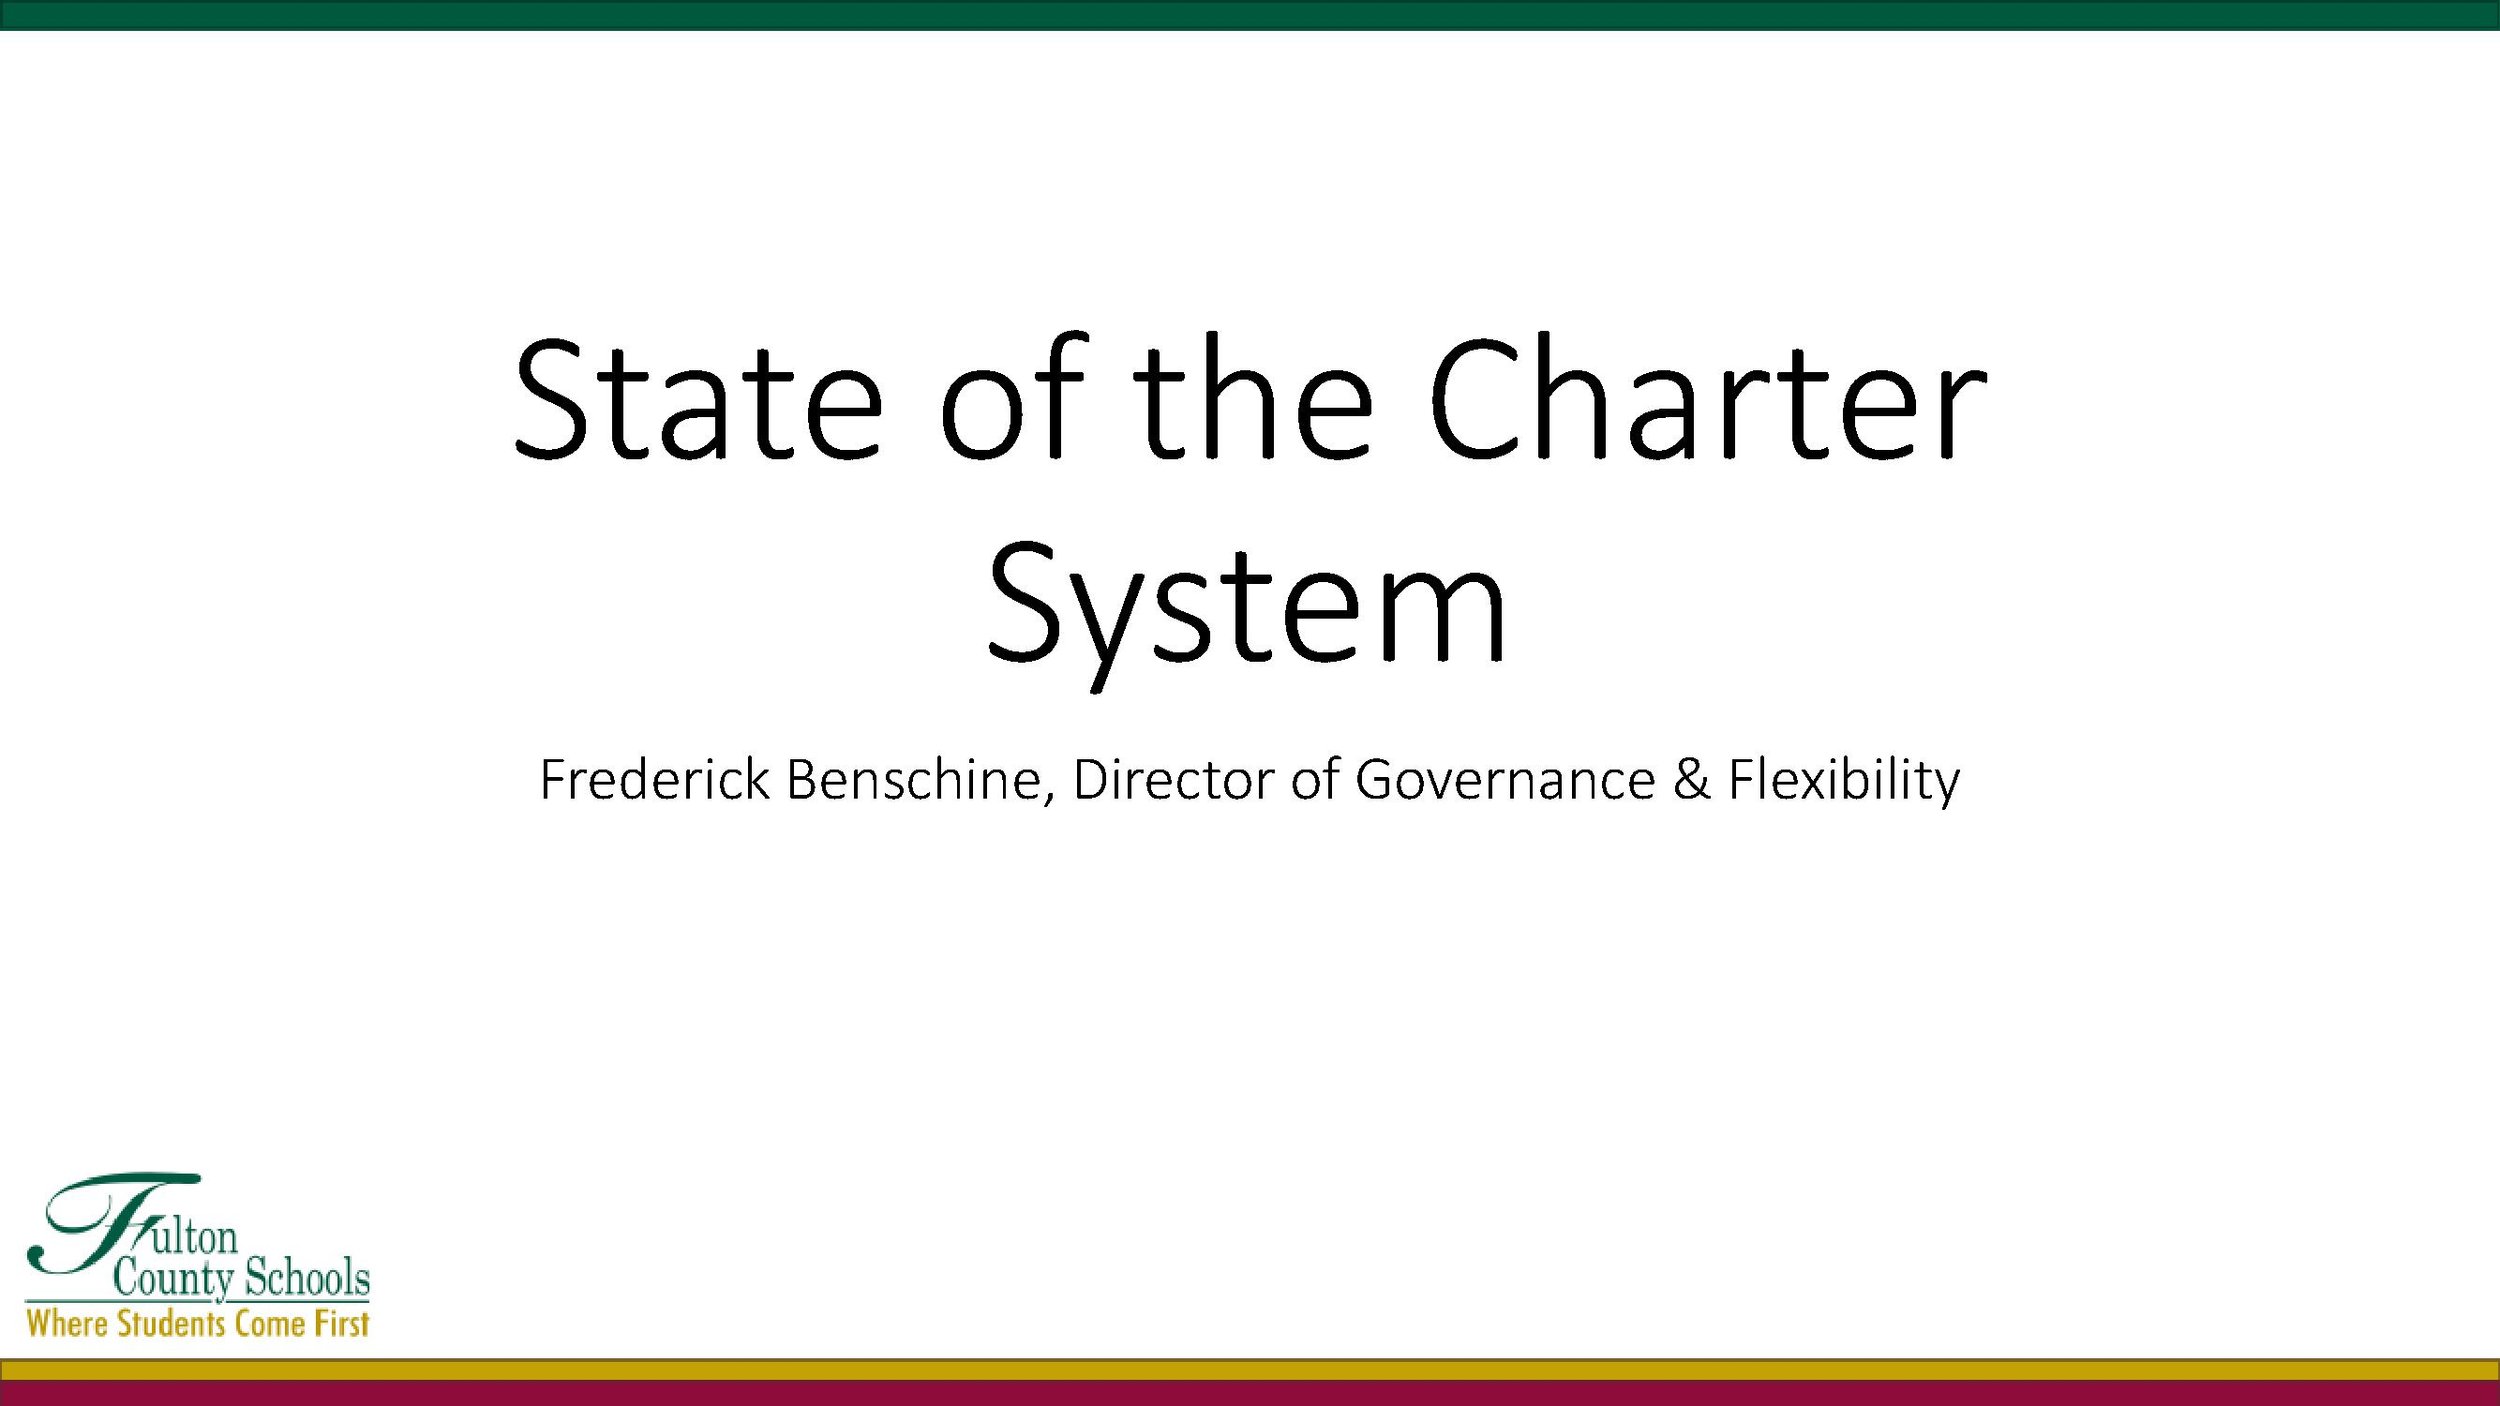 tinywow_State of the Charter System 2.0_44782411_1.jpg